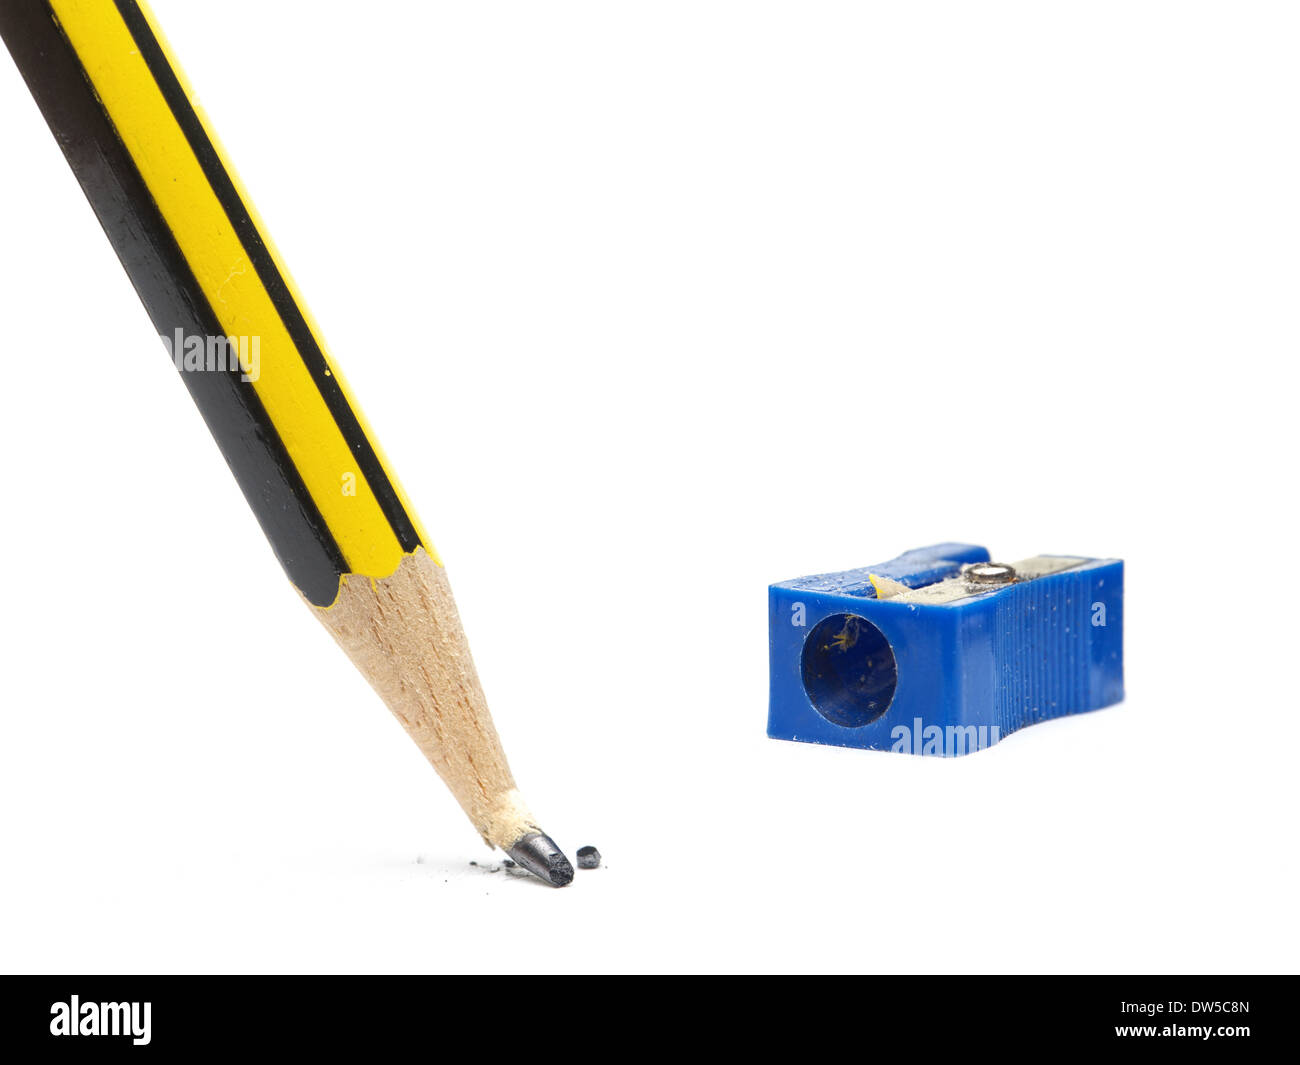 Black and yellow pencil with broken tip and blue sharpener shot on white background Stock Photo